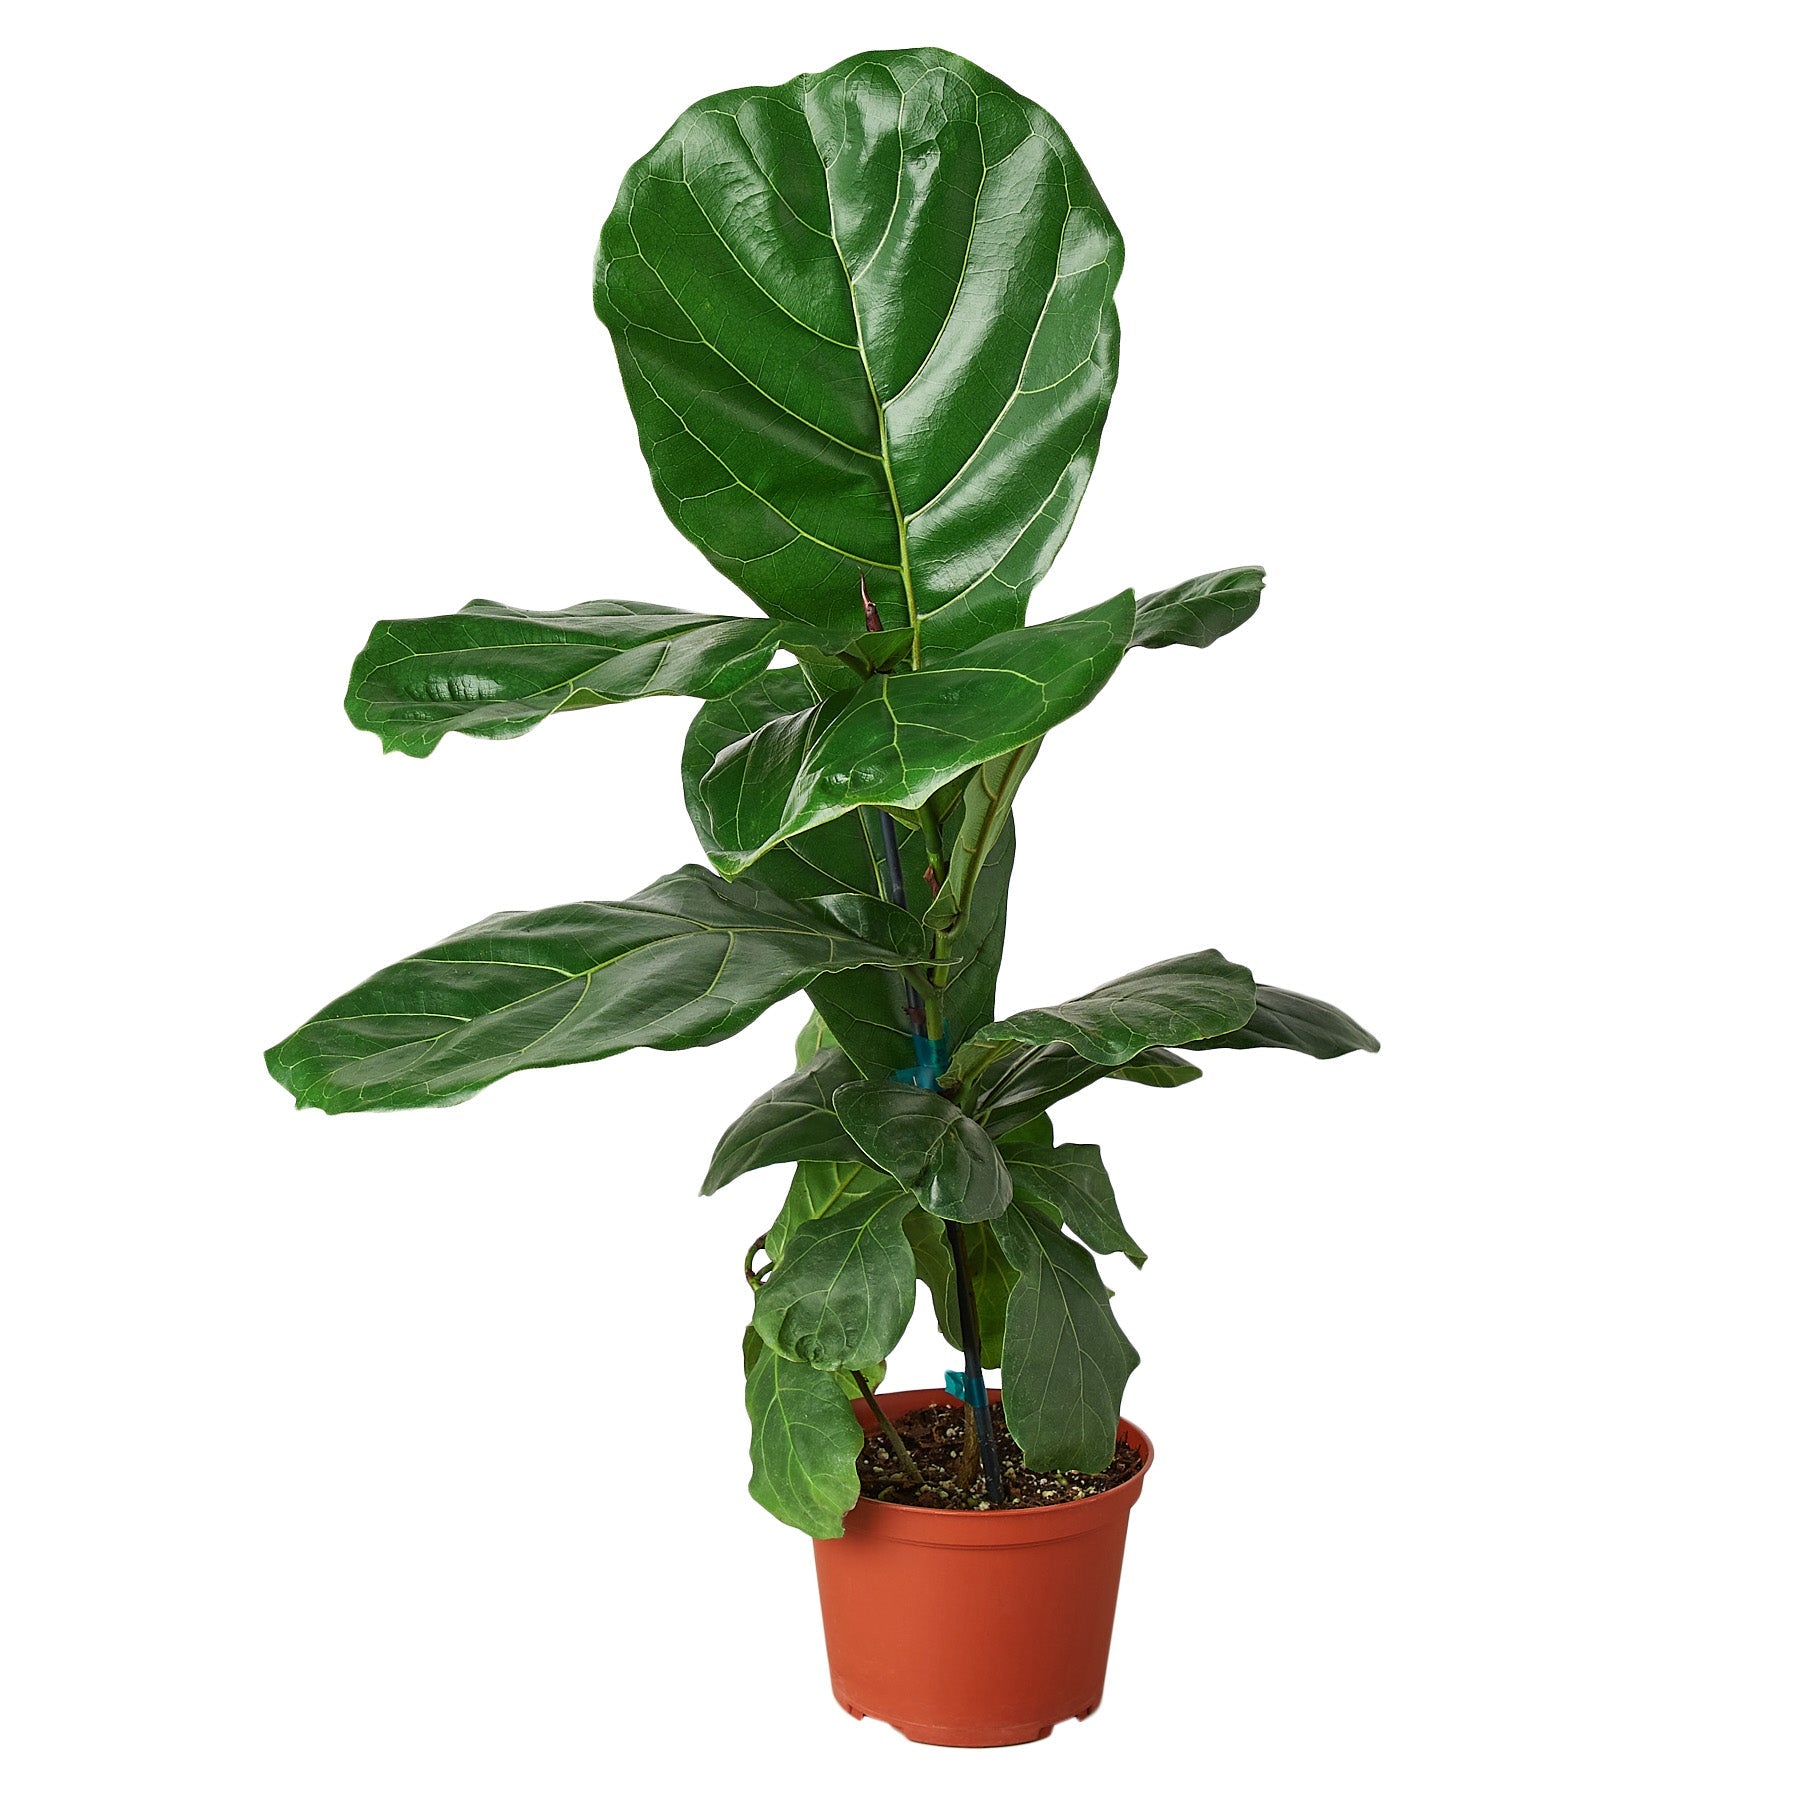 A potted plant with green leaves on a white background available at the best garden center near me.